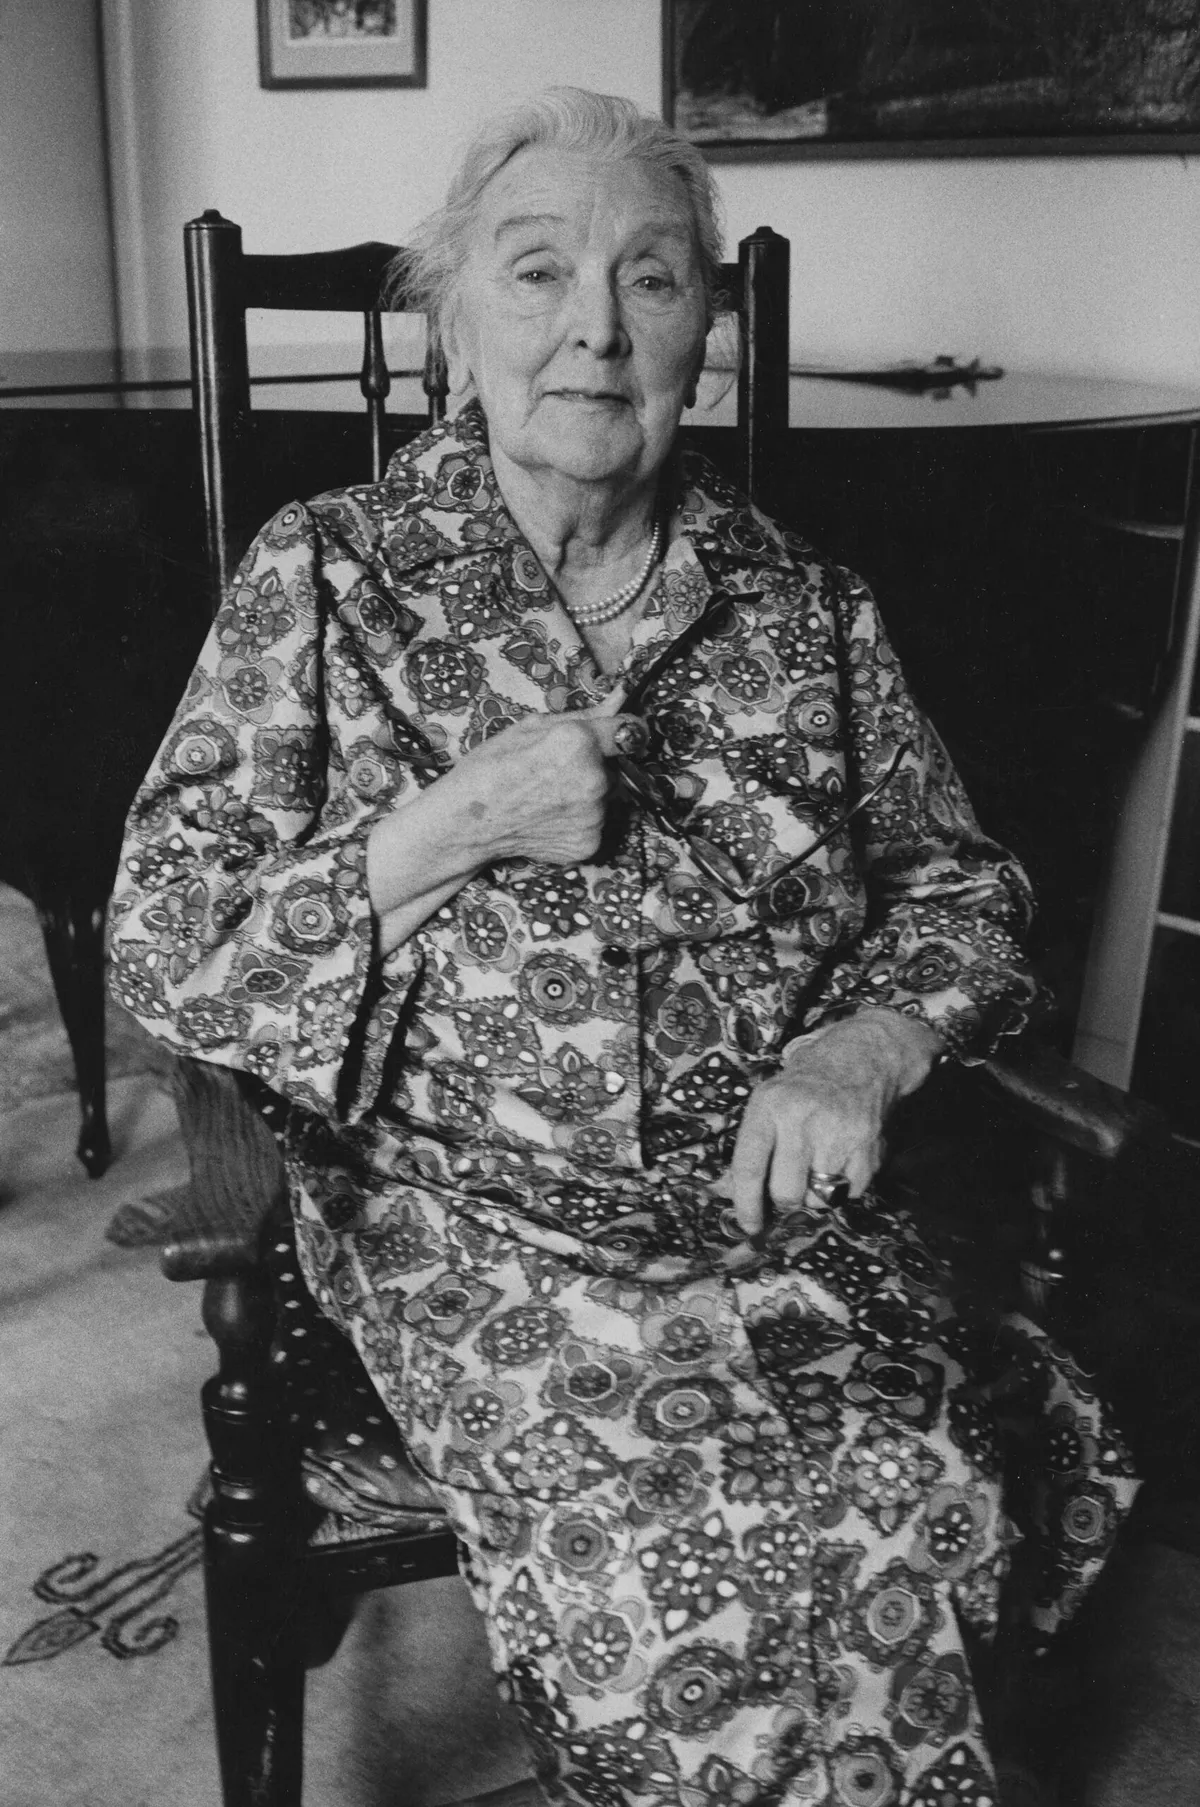 Black and white photograph of Sybil Thorndike, an old woman with white hair wearing a patterned shirt